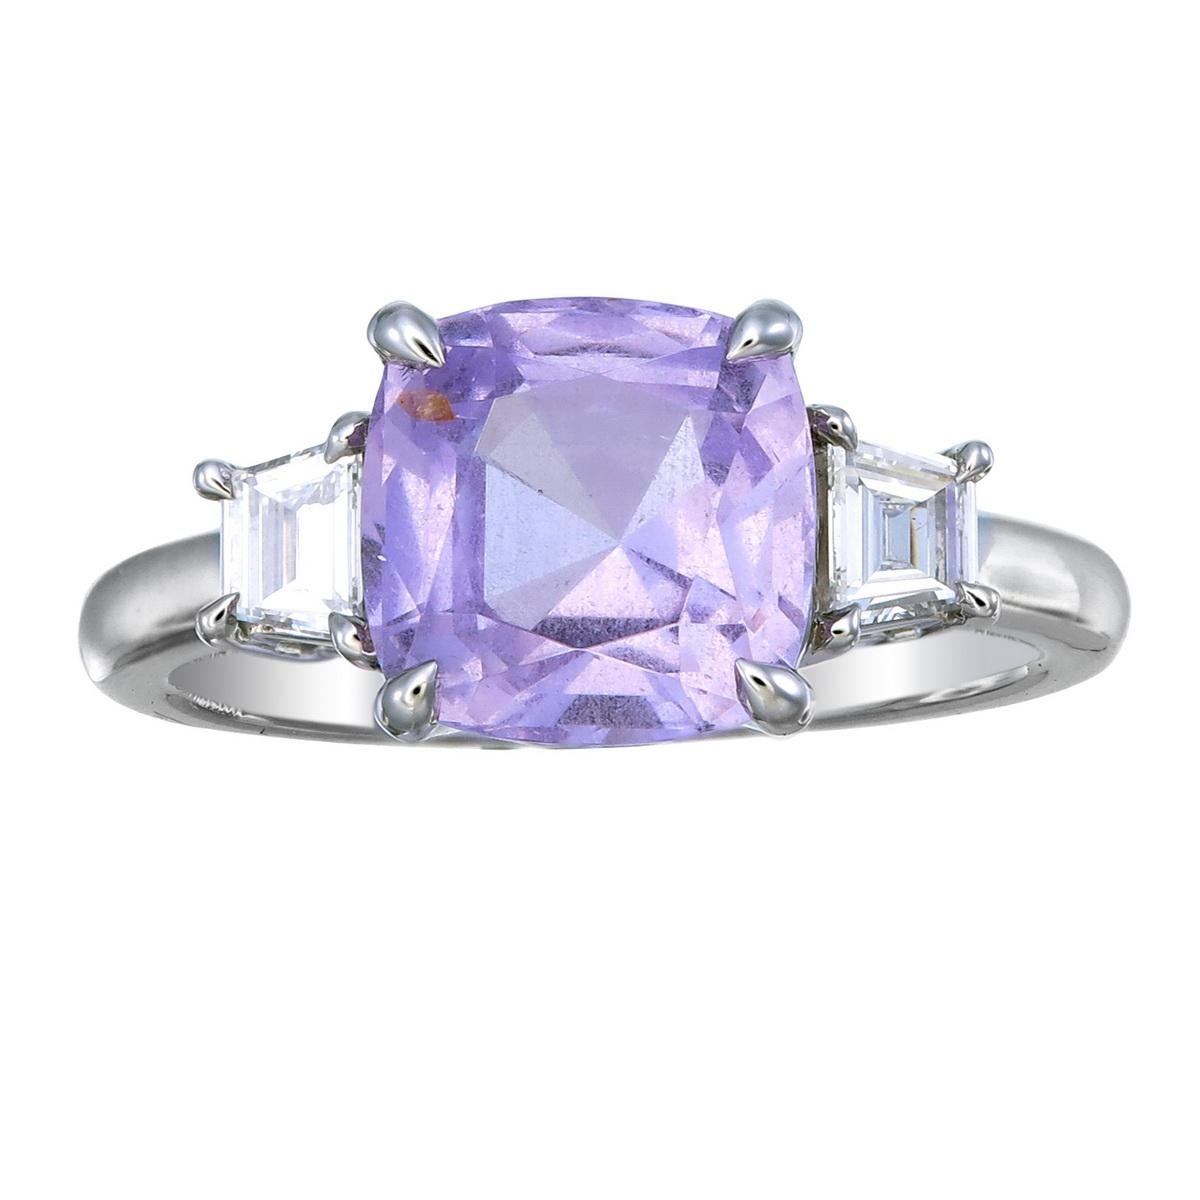 Orloff of Denmark's: Luscious Lilac.
This exquisite 950 Platinum Ring showcases a mesmerizing 'Lilac' purple Spinel, radiating a soft, enchanting hue. Flanking this central gem are two dazzling Trapezoid cut diamonds, each boasting VS clarity and a